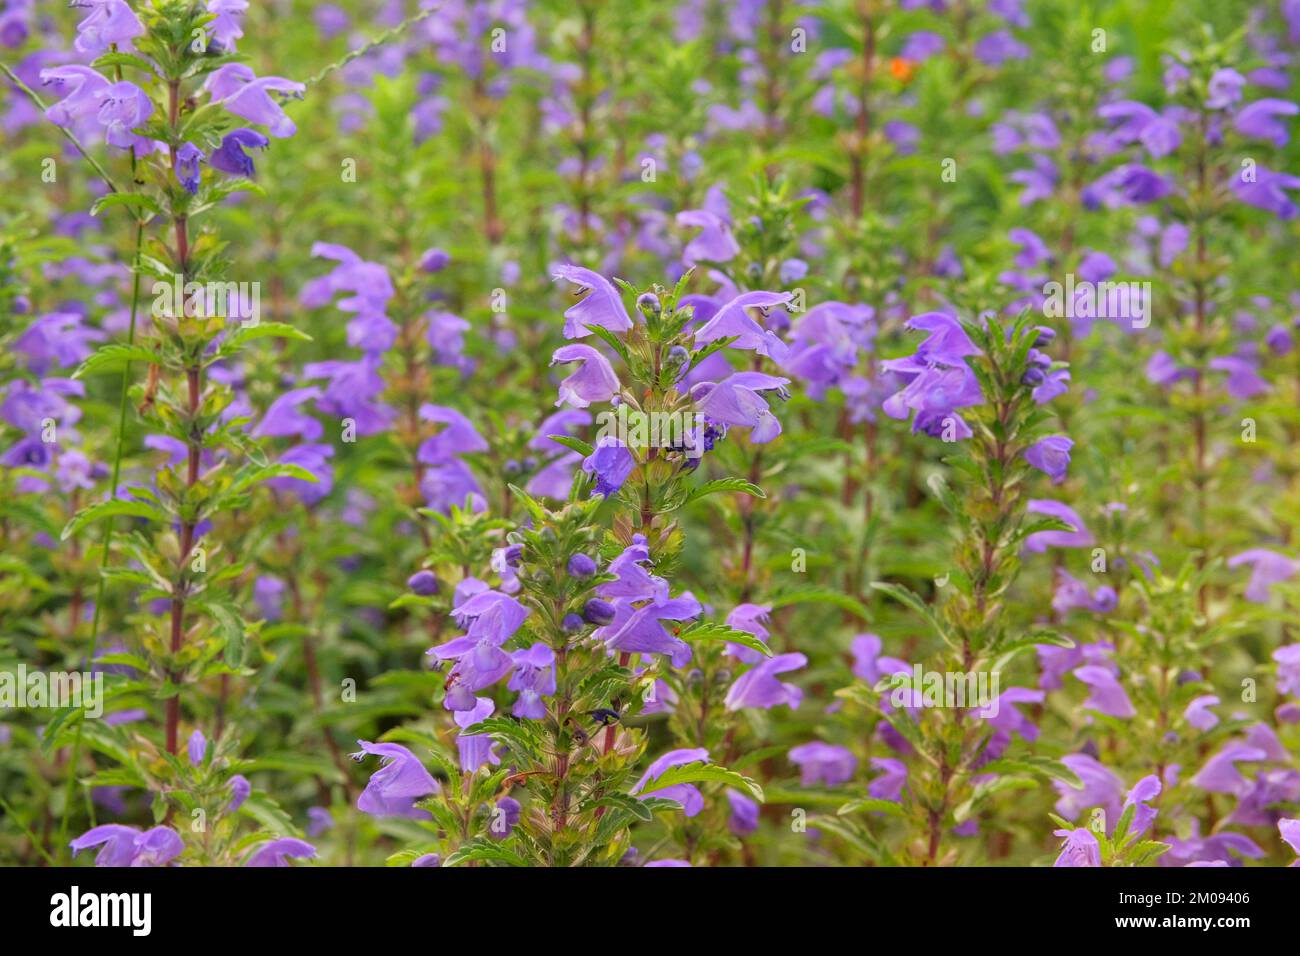 Melissa grown in a rustic farm garden. Melissa flowers in farming and harvesting. Purple flowers into the farmland. Stock Photo